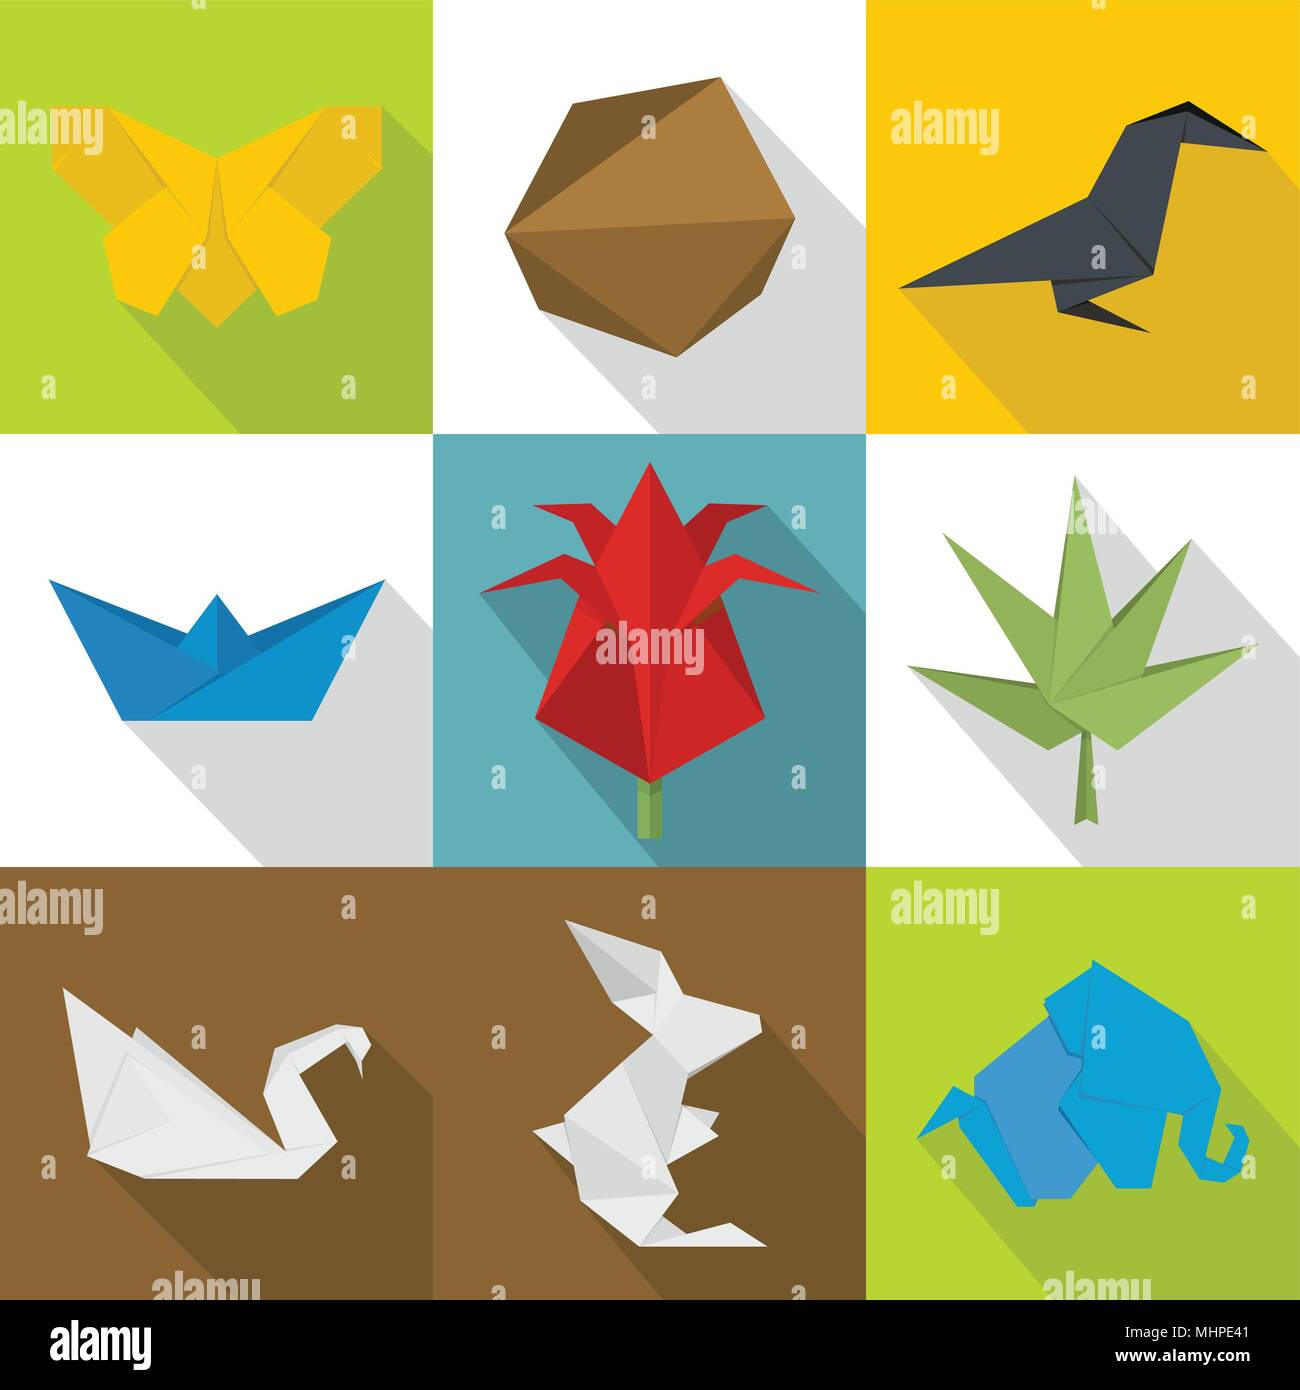 Icons set Origami style cartoon Image Vectorielle Stock - Alamy